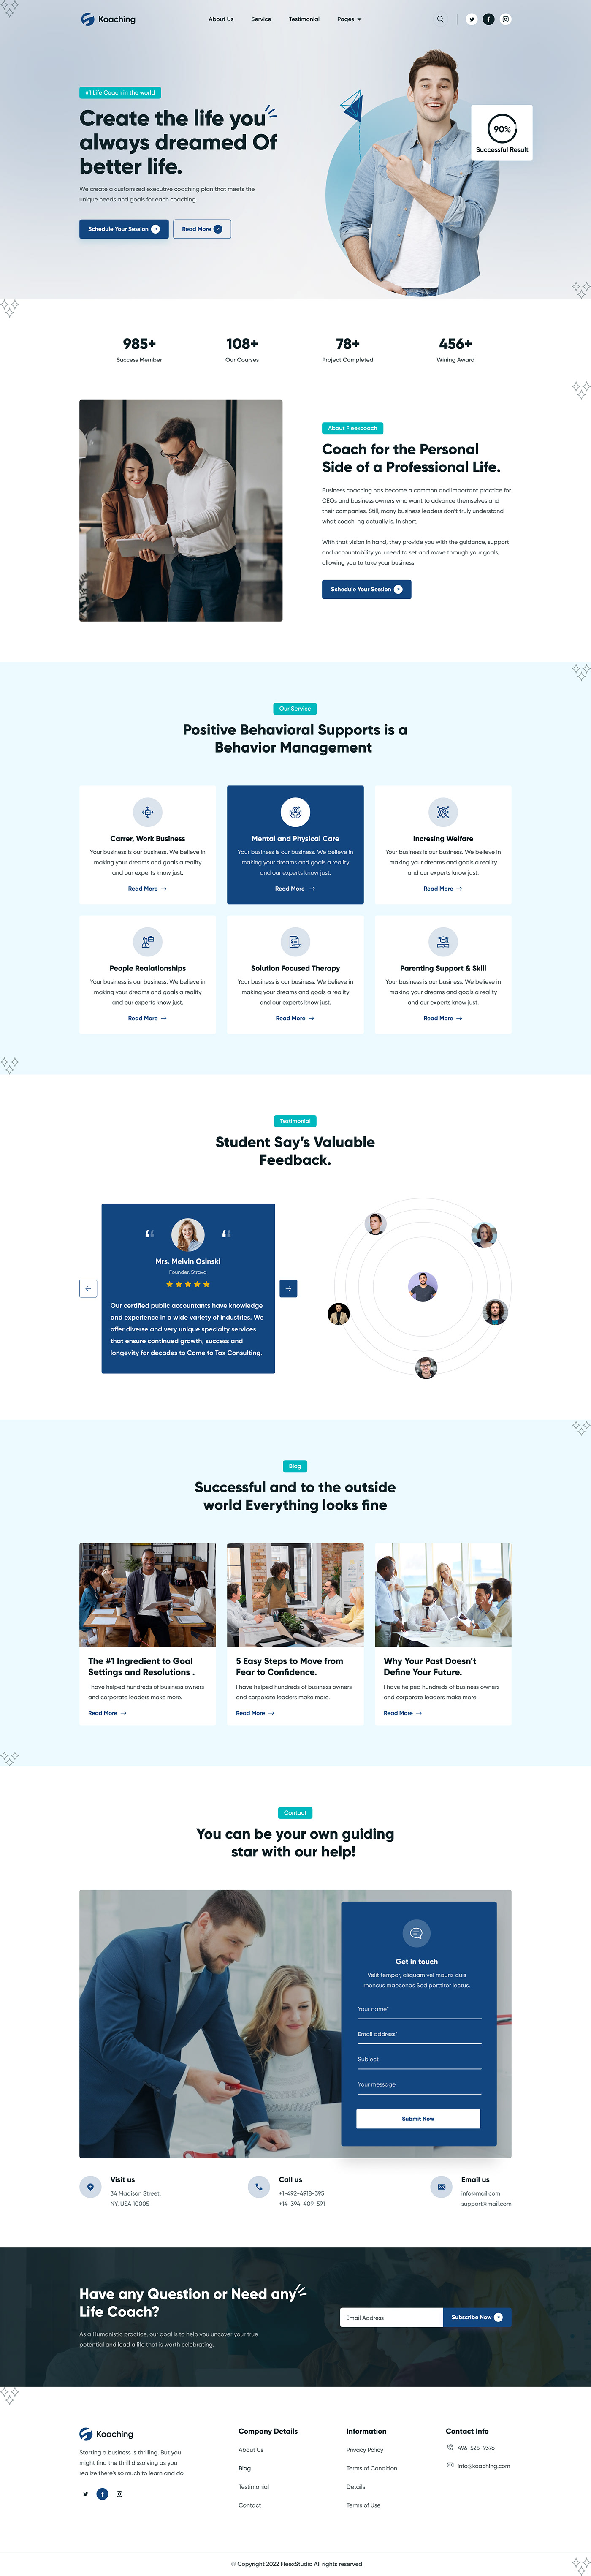 Life Coaching & Consultant Landing Page
